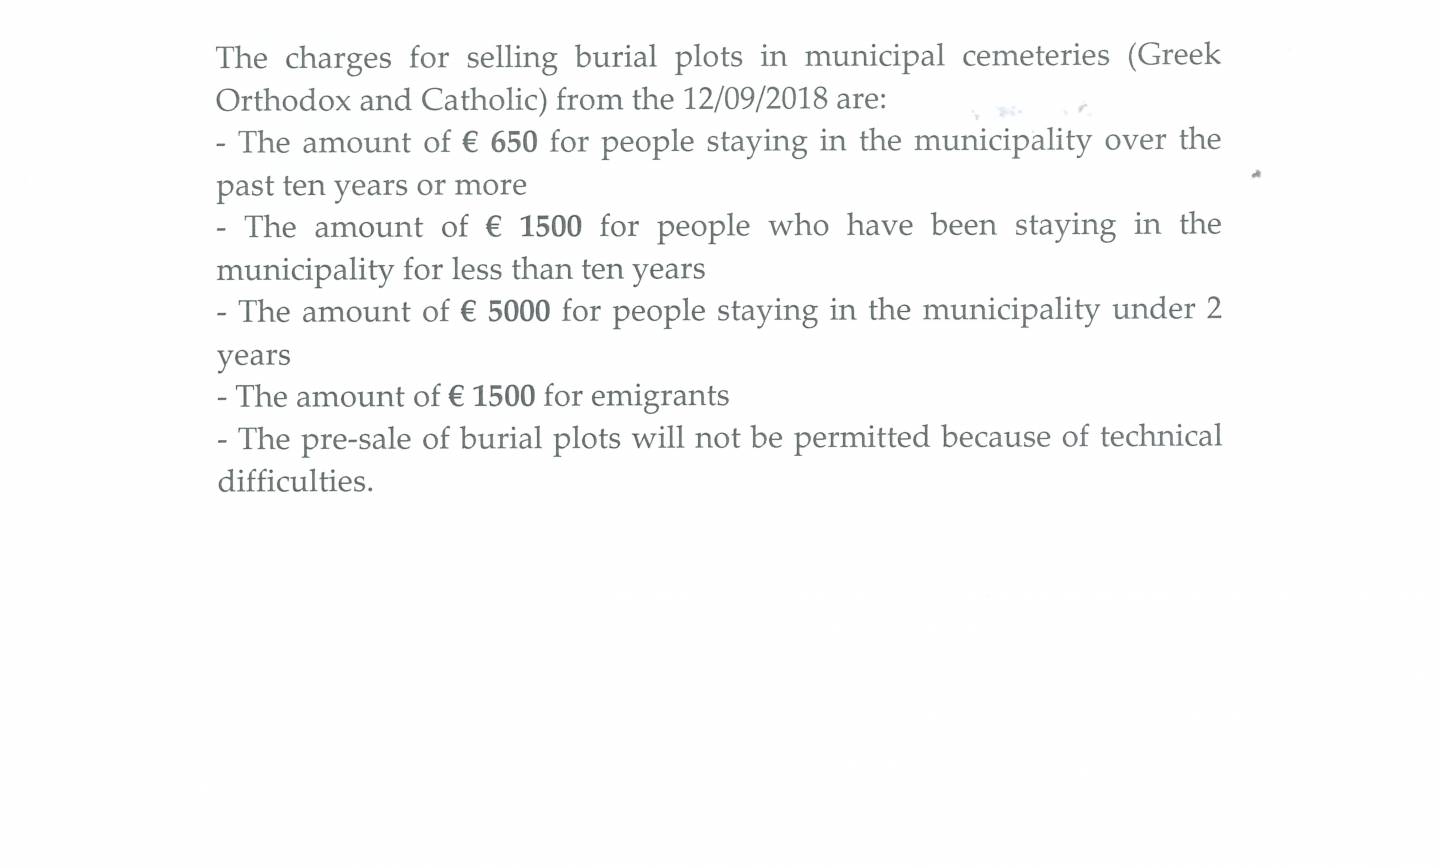 Charges for selling burial plots